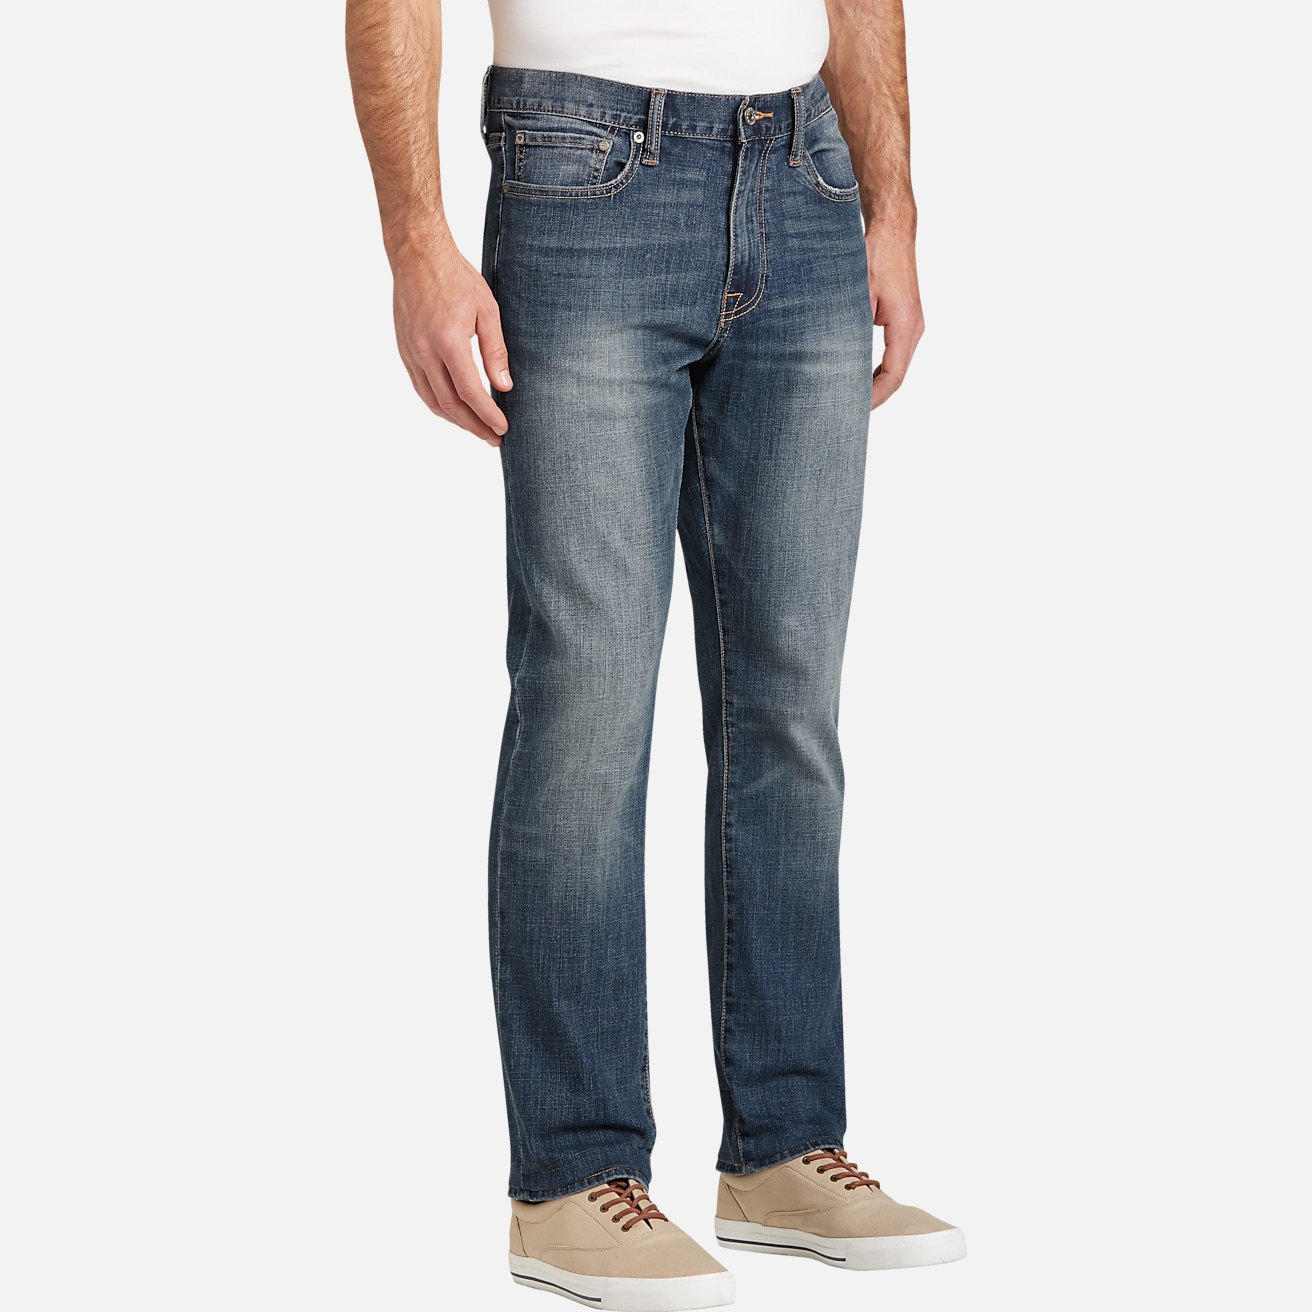 https://image.menswearhouse.com/is/image/TMW/TMW_218D_51_LUCKY_BRAND_JEANS_MEDIUM_WASH_MAIN?imPolicy=pdp-mob-2x